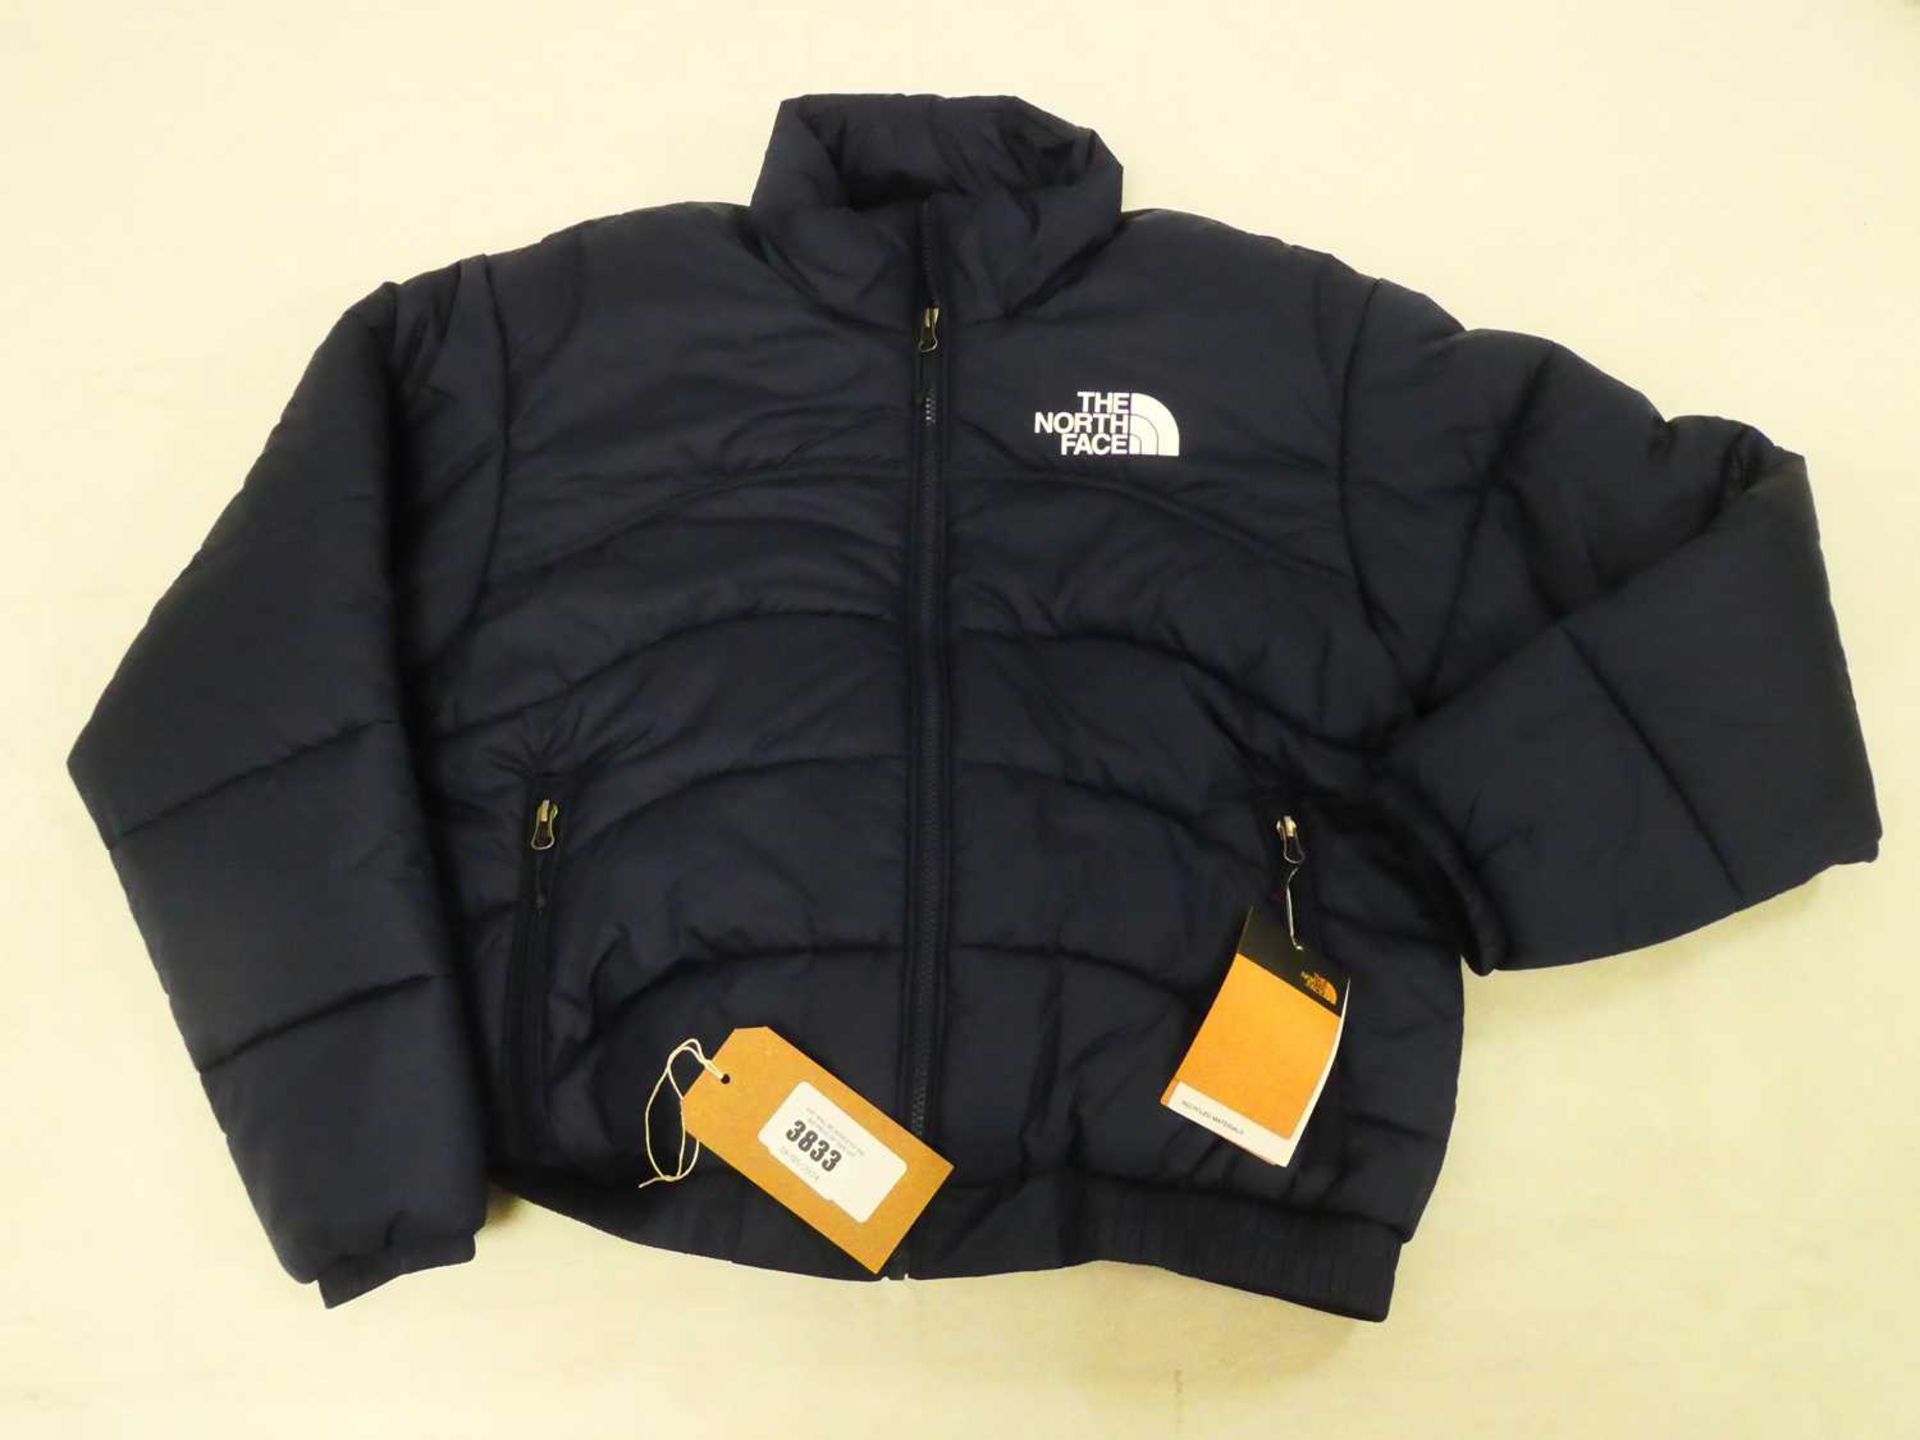 +VAT The North Face 2000 puffer jacket in navy size medium (hanging)